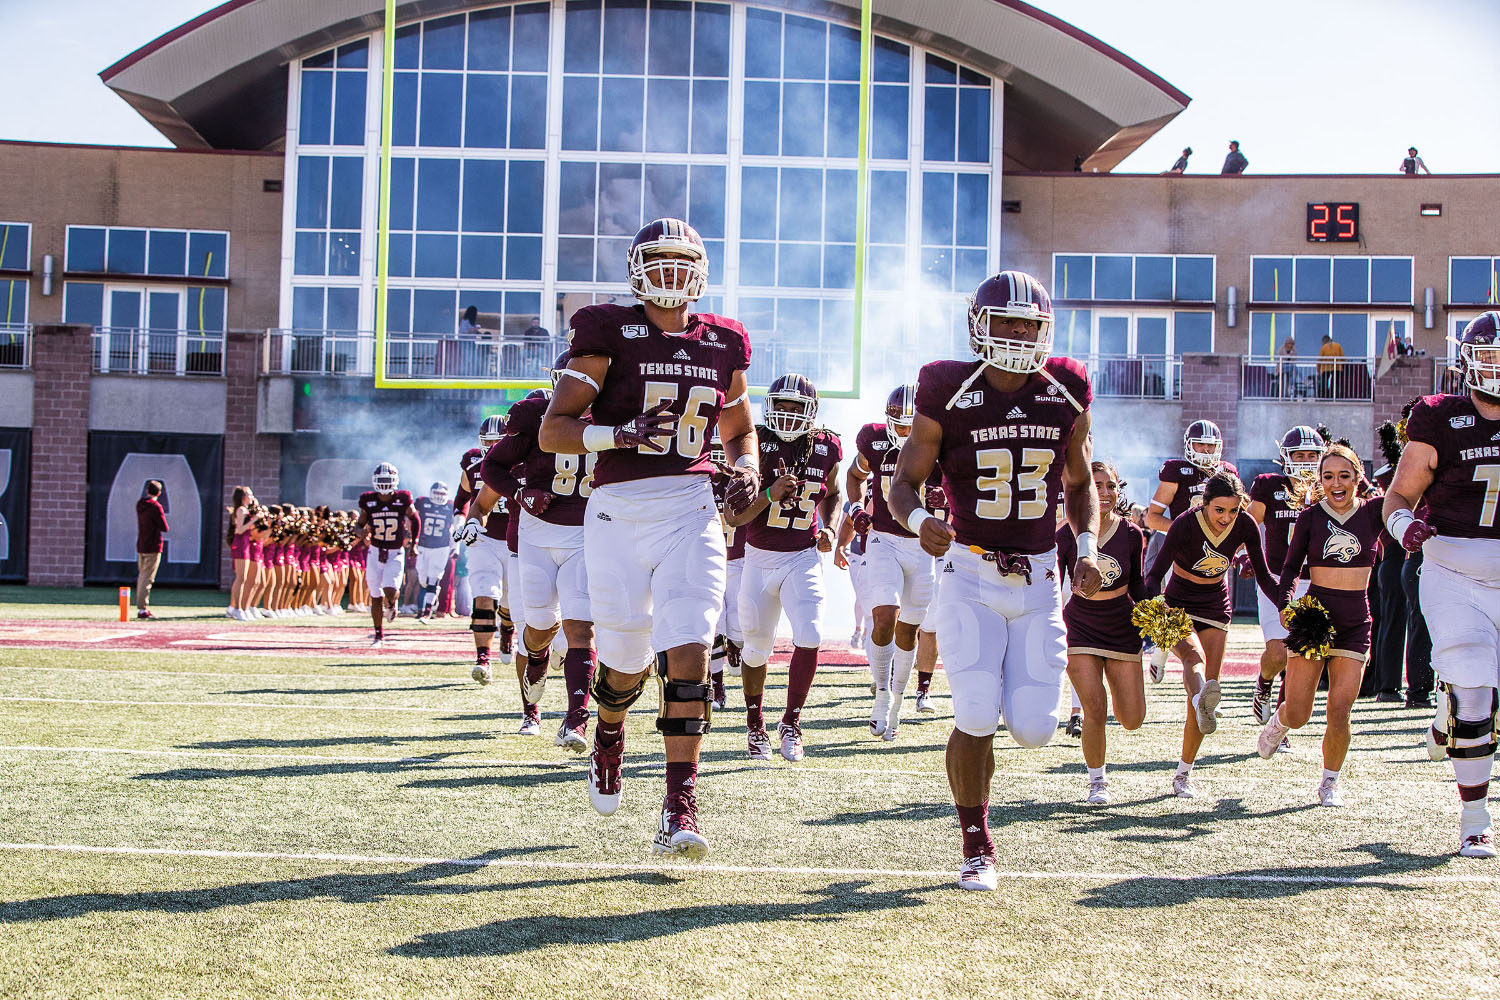 Football players and cheerleaders from Texas State take the field